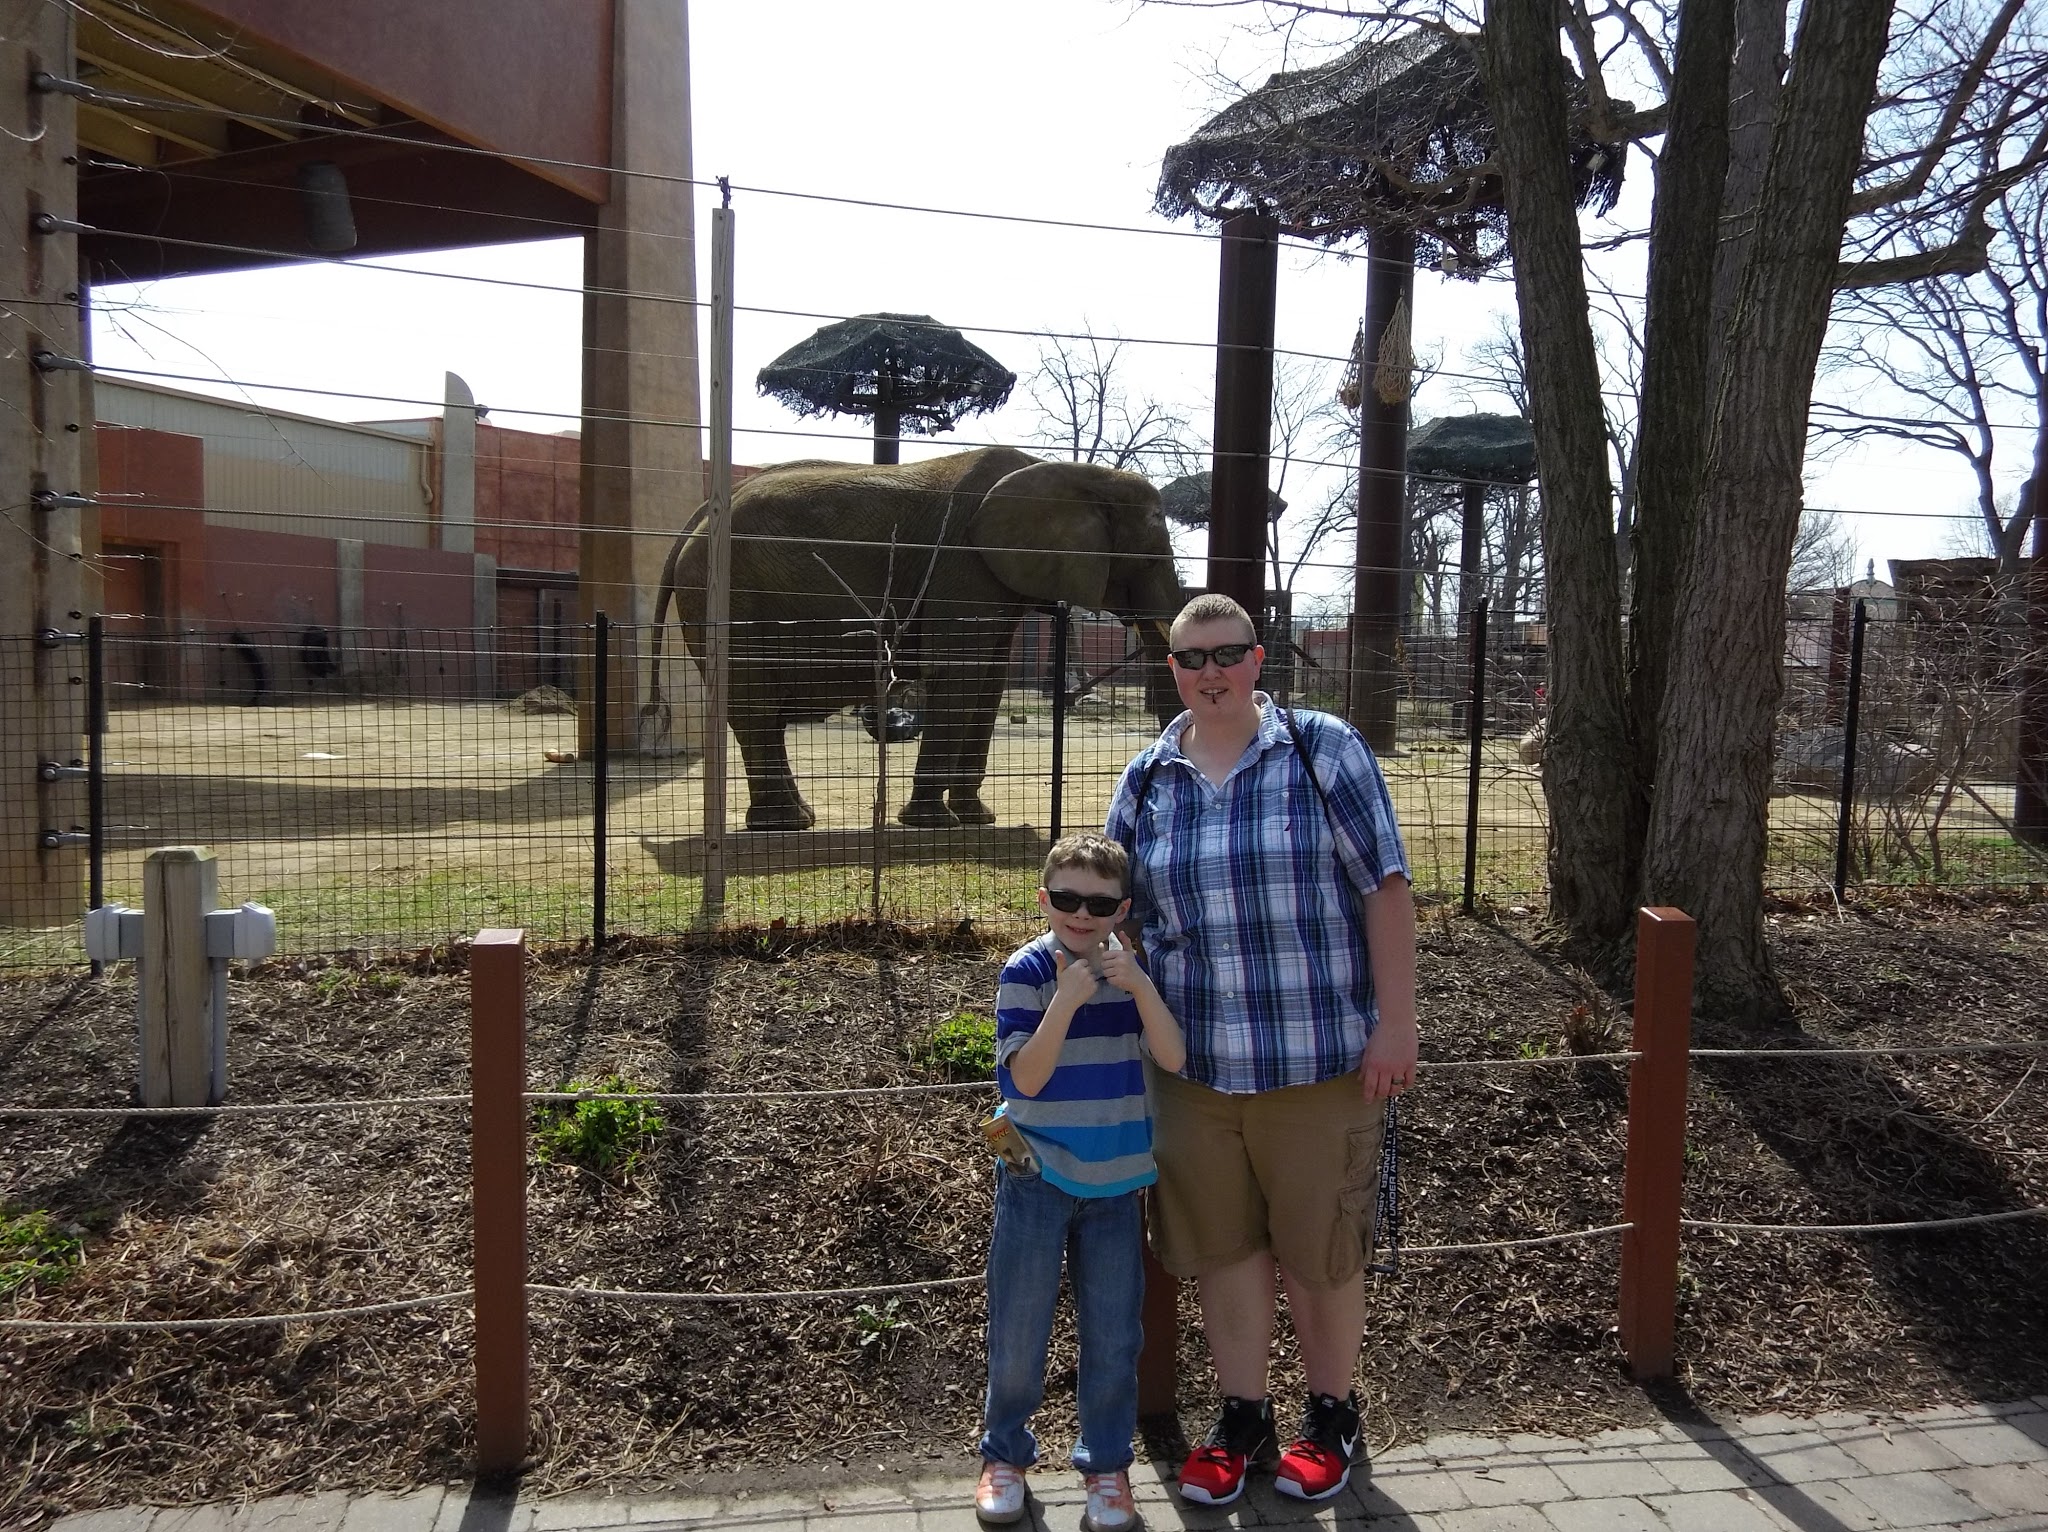 Reasons to visit the Toledo Zoo